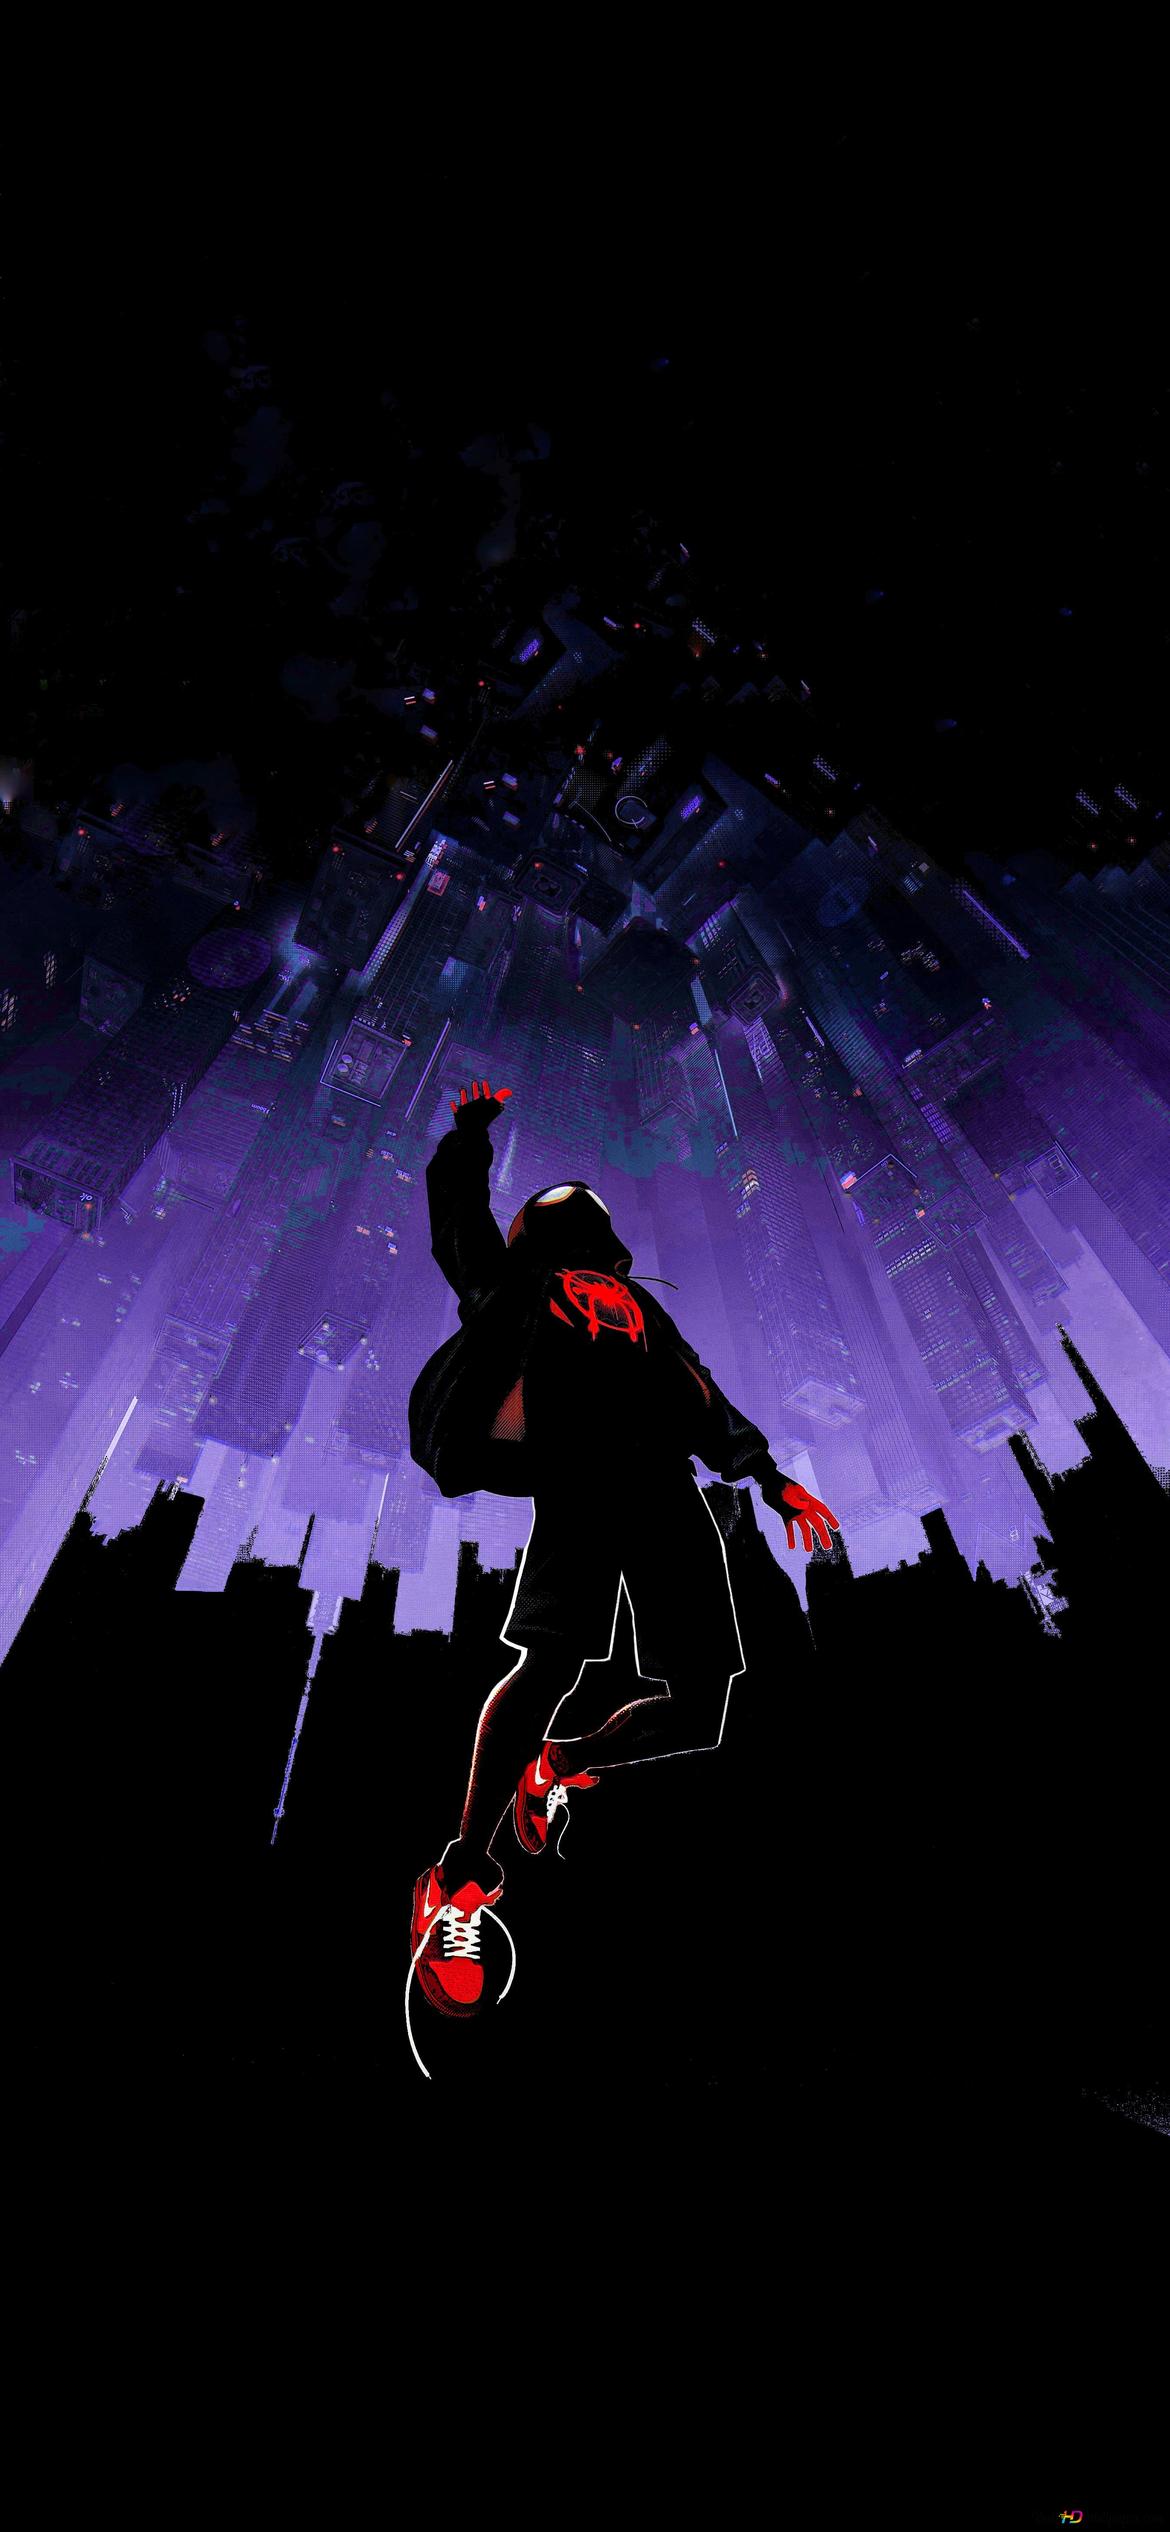 Spiderman superhero doing business with bright red light with purple light 2K wallpaper download